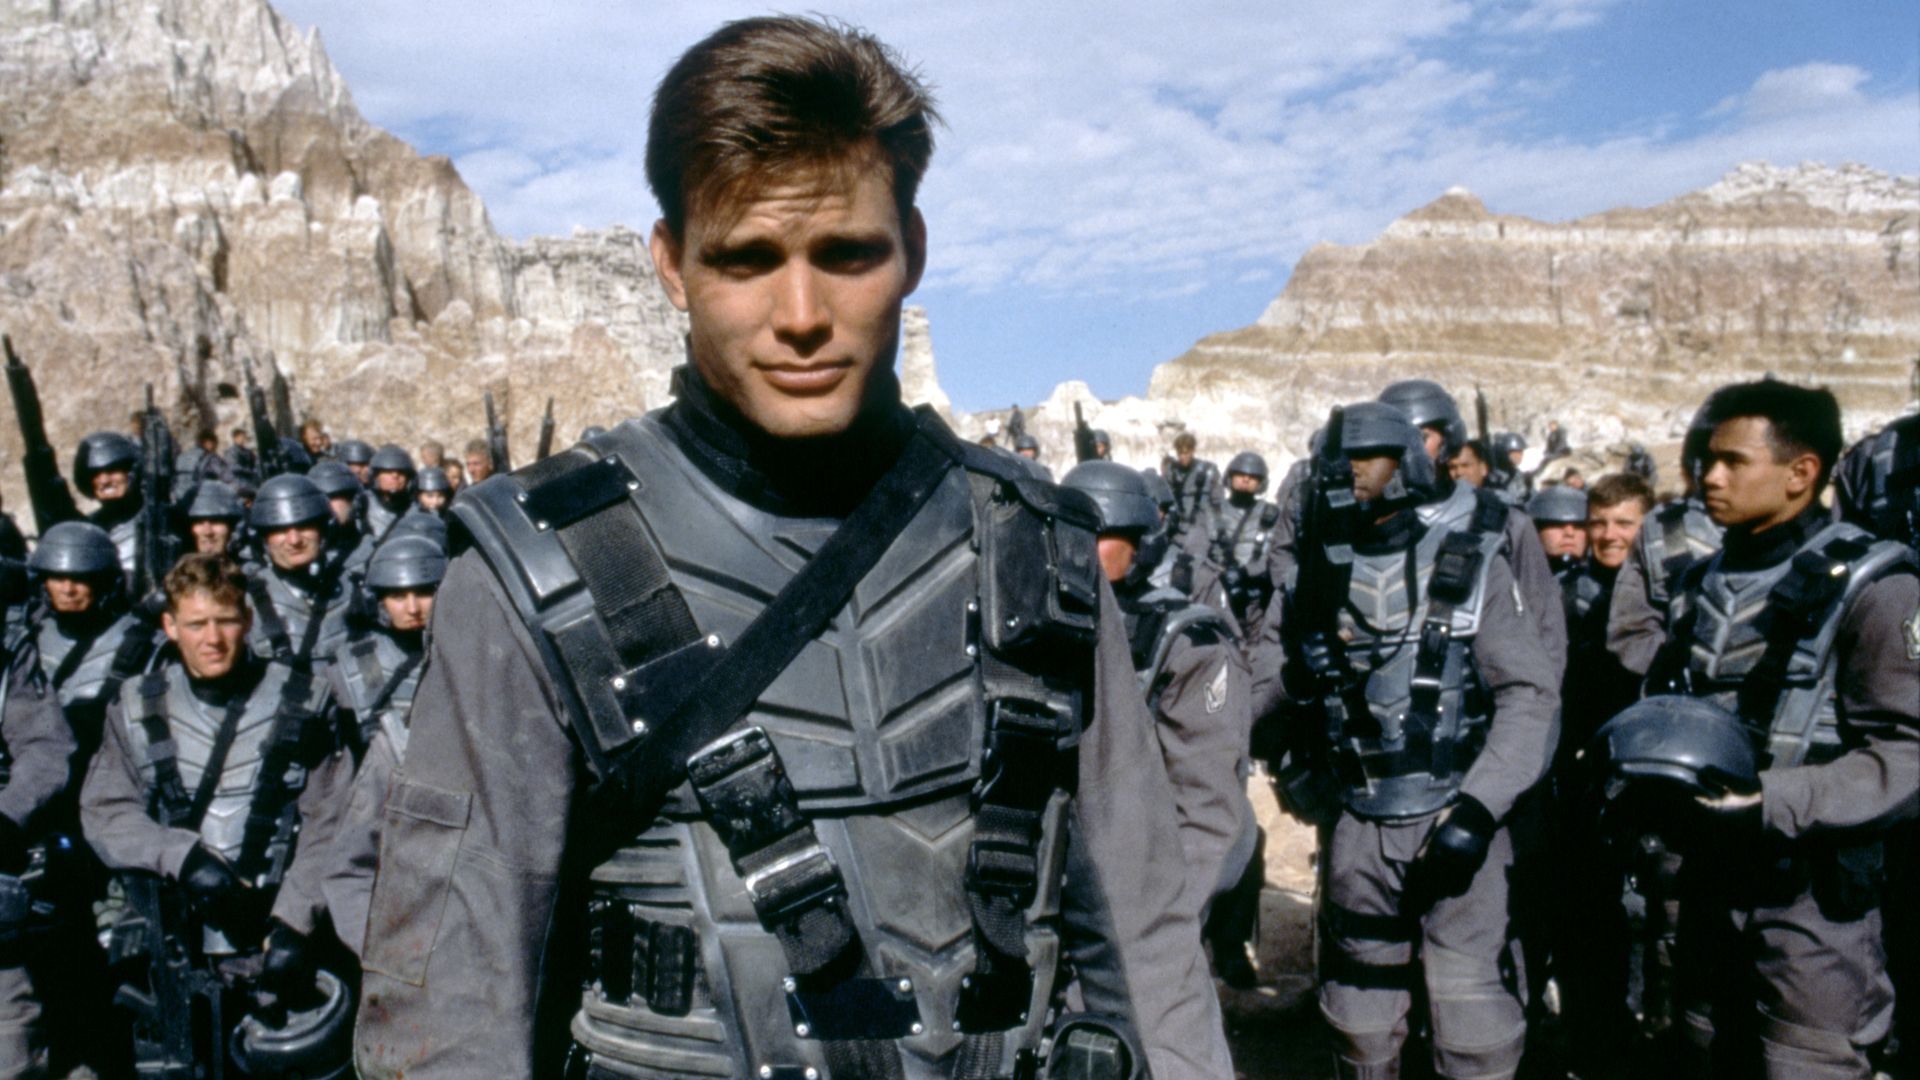 Photo of a group of men in sci-fi military uniforms